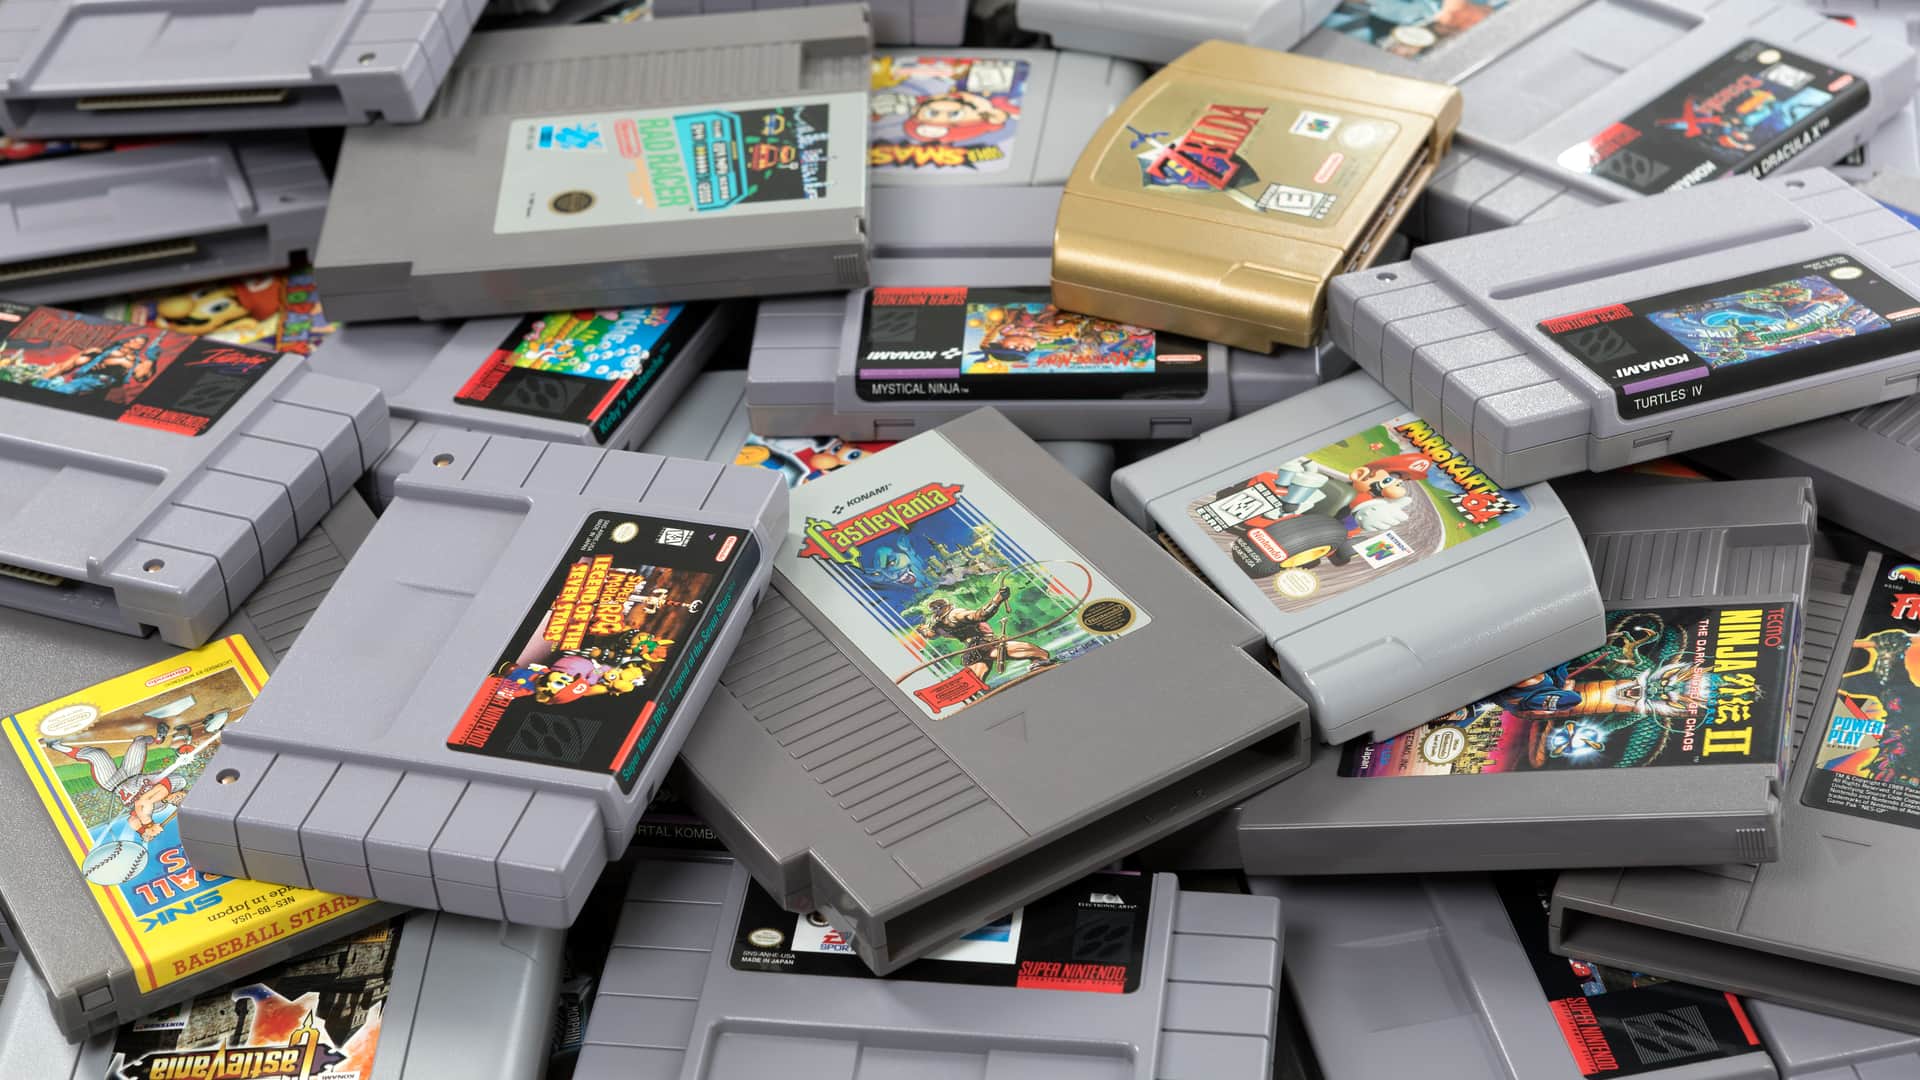 Pile of Nintendo cartridges among which the golden cartridge of The Legend of Zelda Ocarina of Time stands out, one of the best video games in history